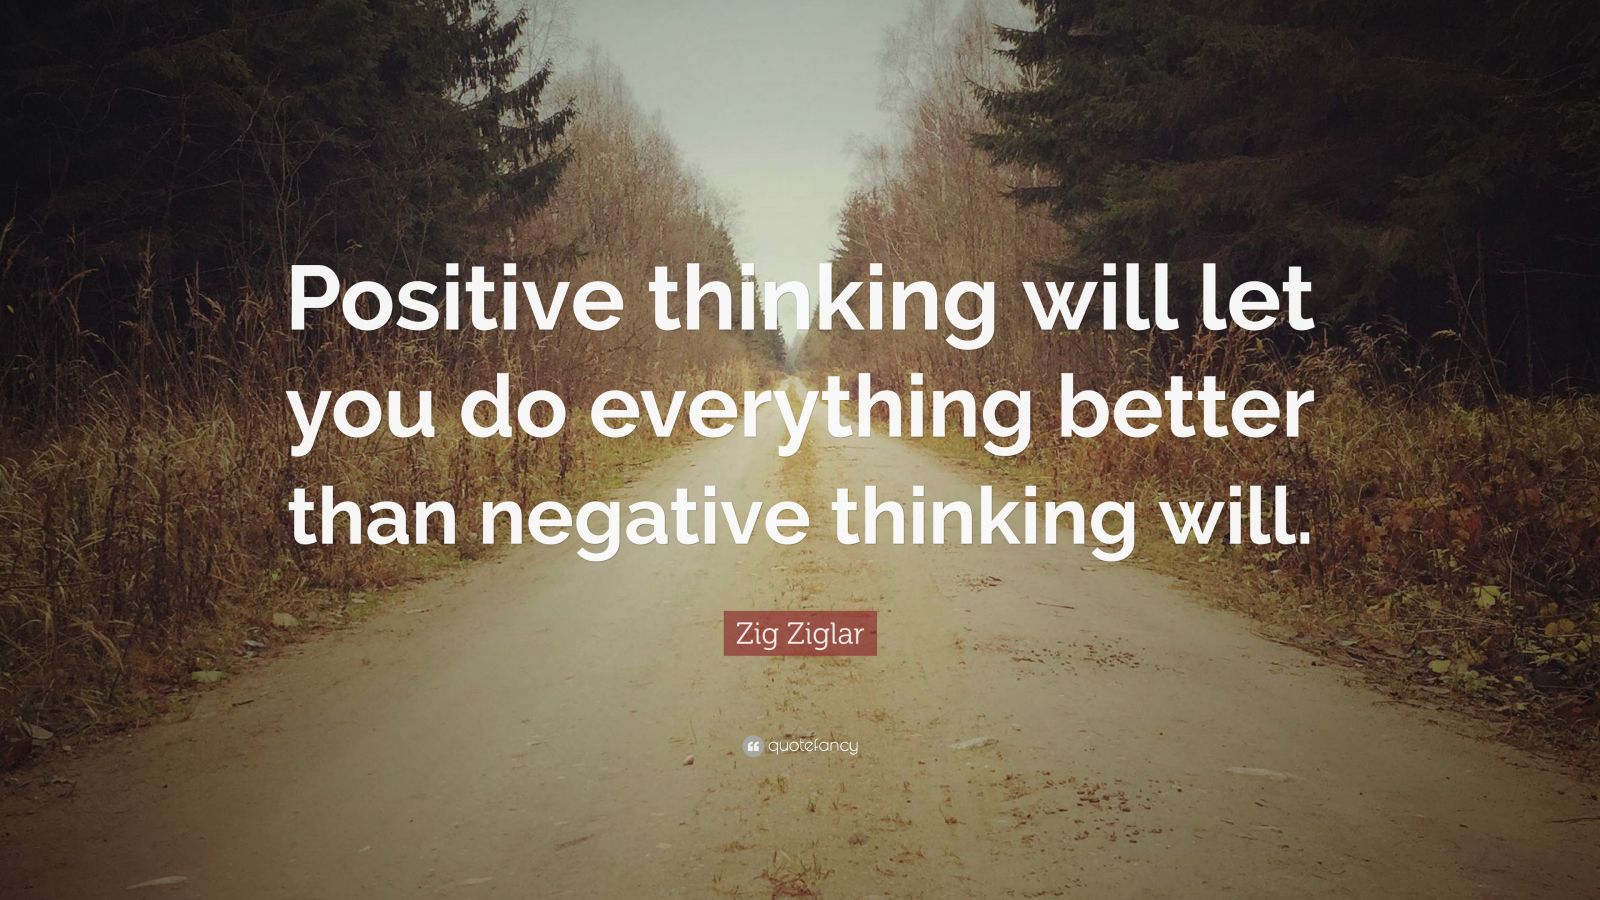 Zig Ziglar Quote: “Positive thinking will let you do everything better